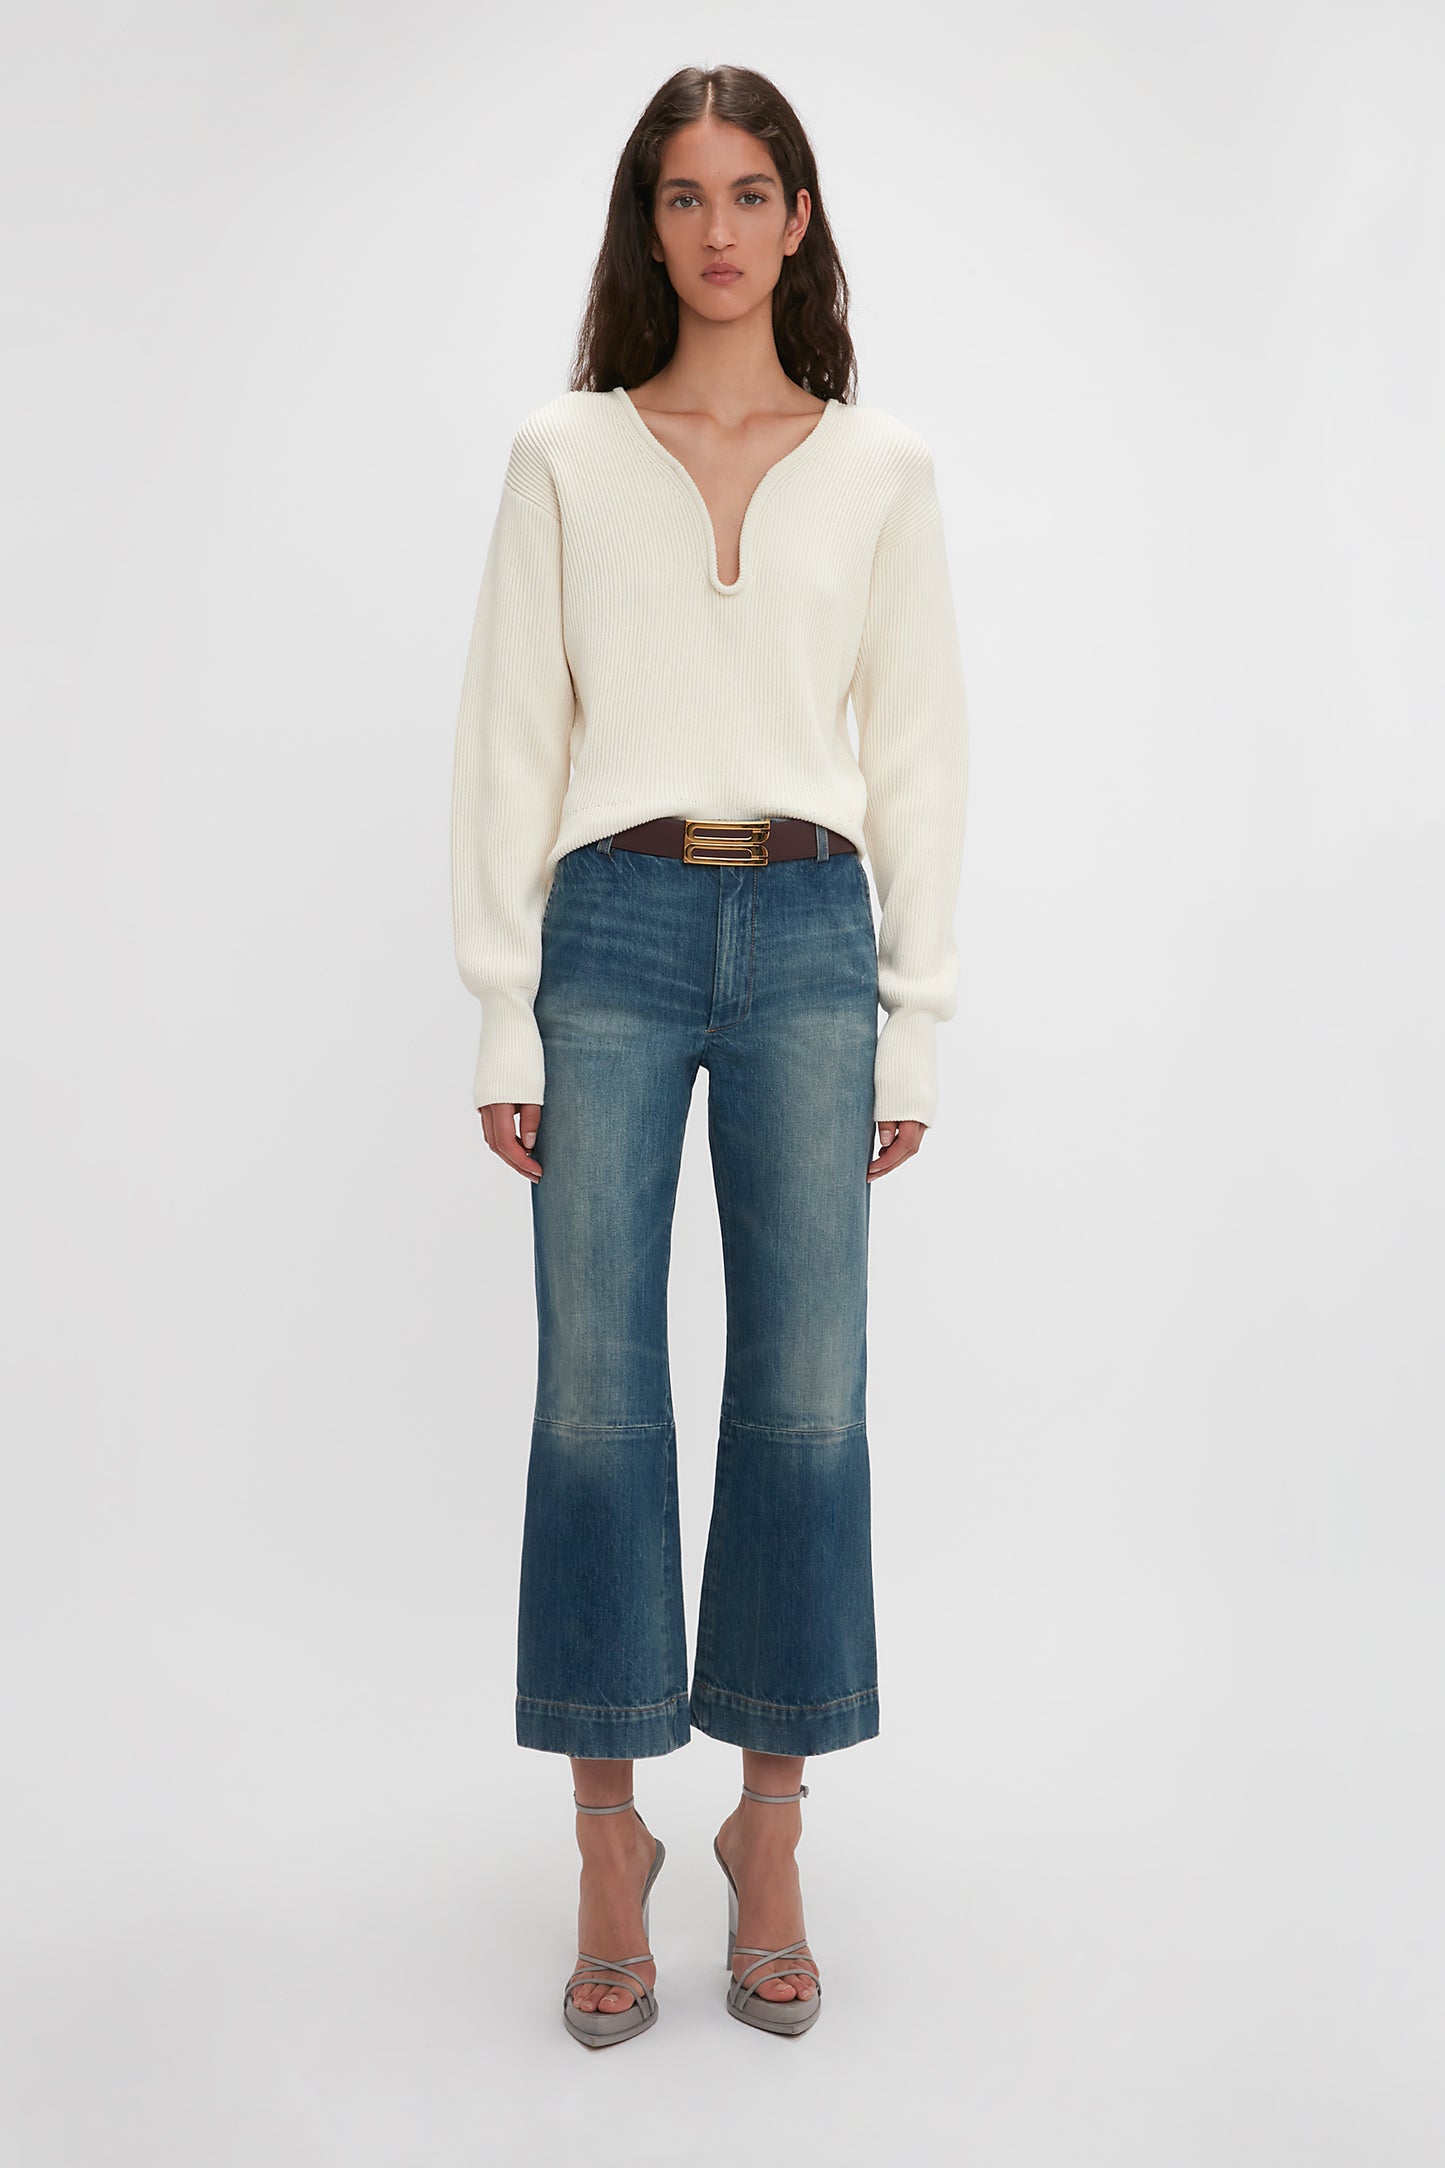 A woman wearing a white v-neck sweater and Victoria Beckham's Cropped Kick Jean In Indigrey Wash standing against a plain white background.